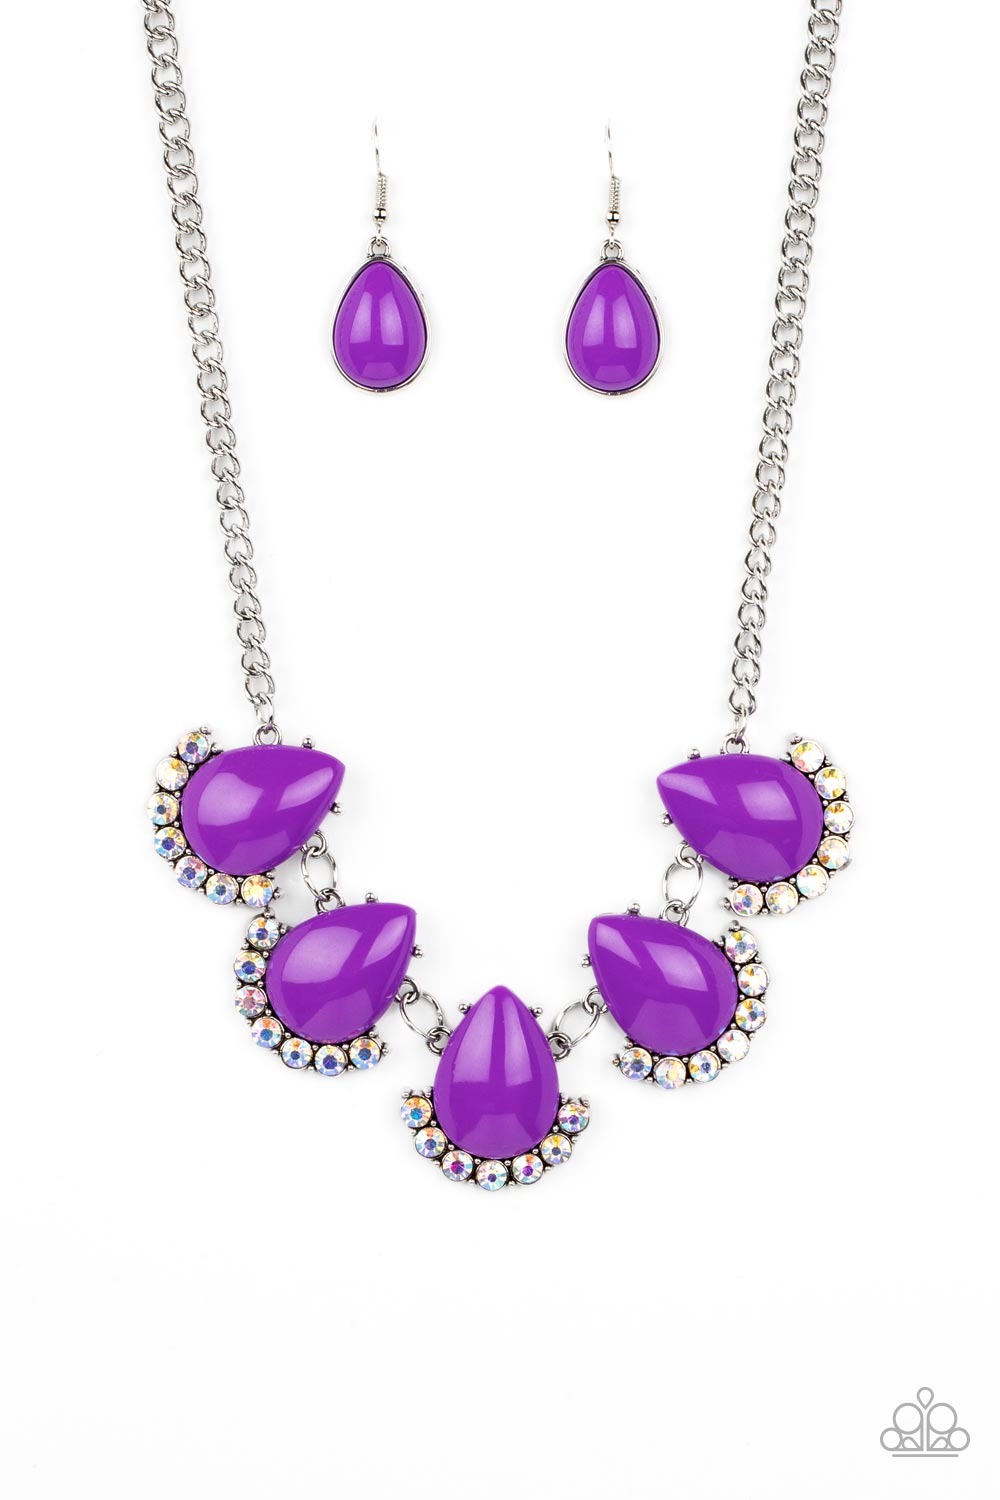 Ethereal Exaggerations - Purple Teardrop Beads/Iridescent Rhinestones Paparazzi Necklace & matching earrings